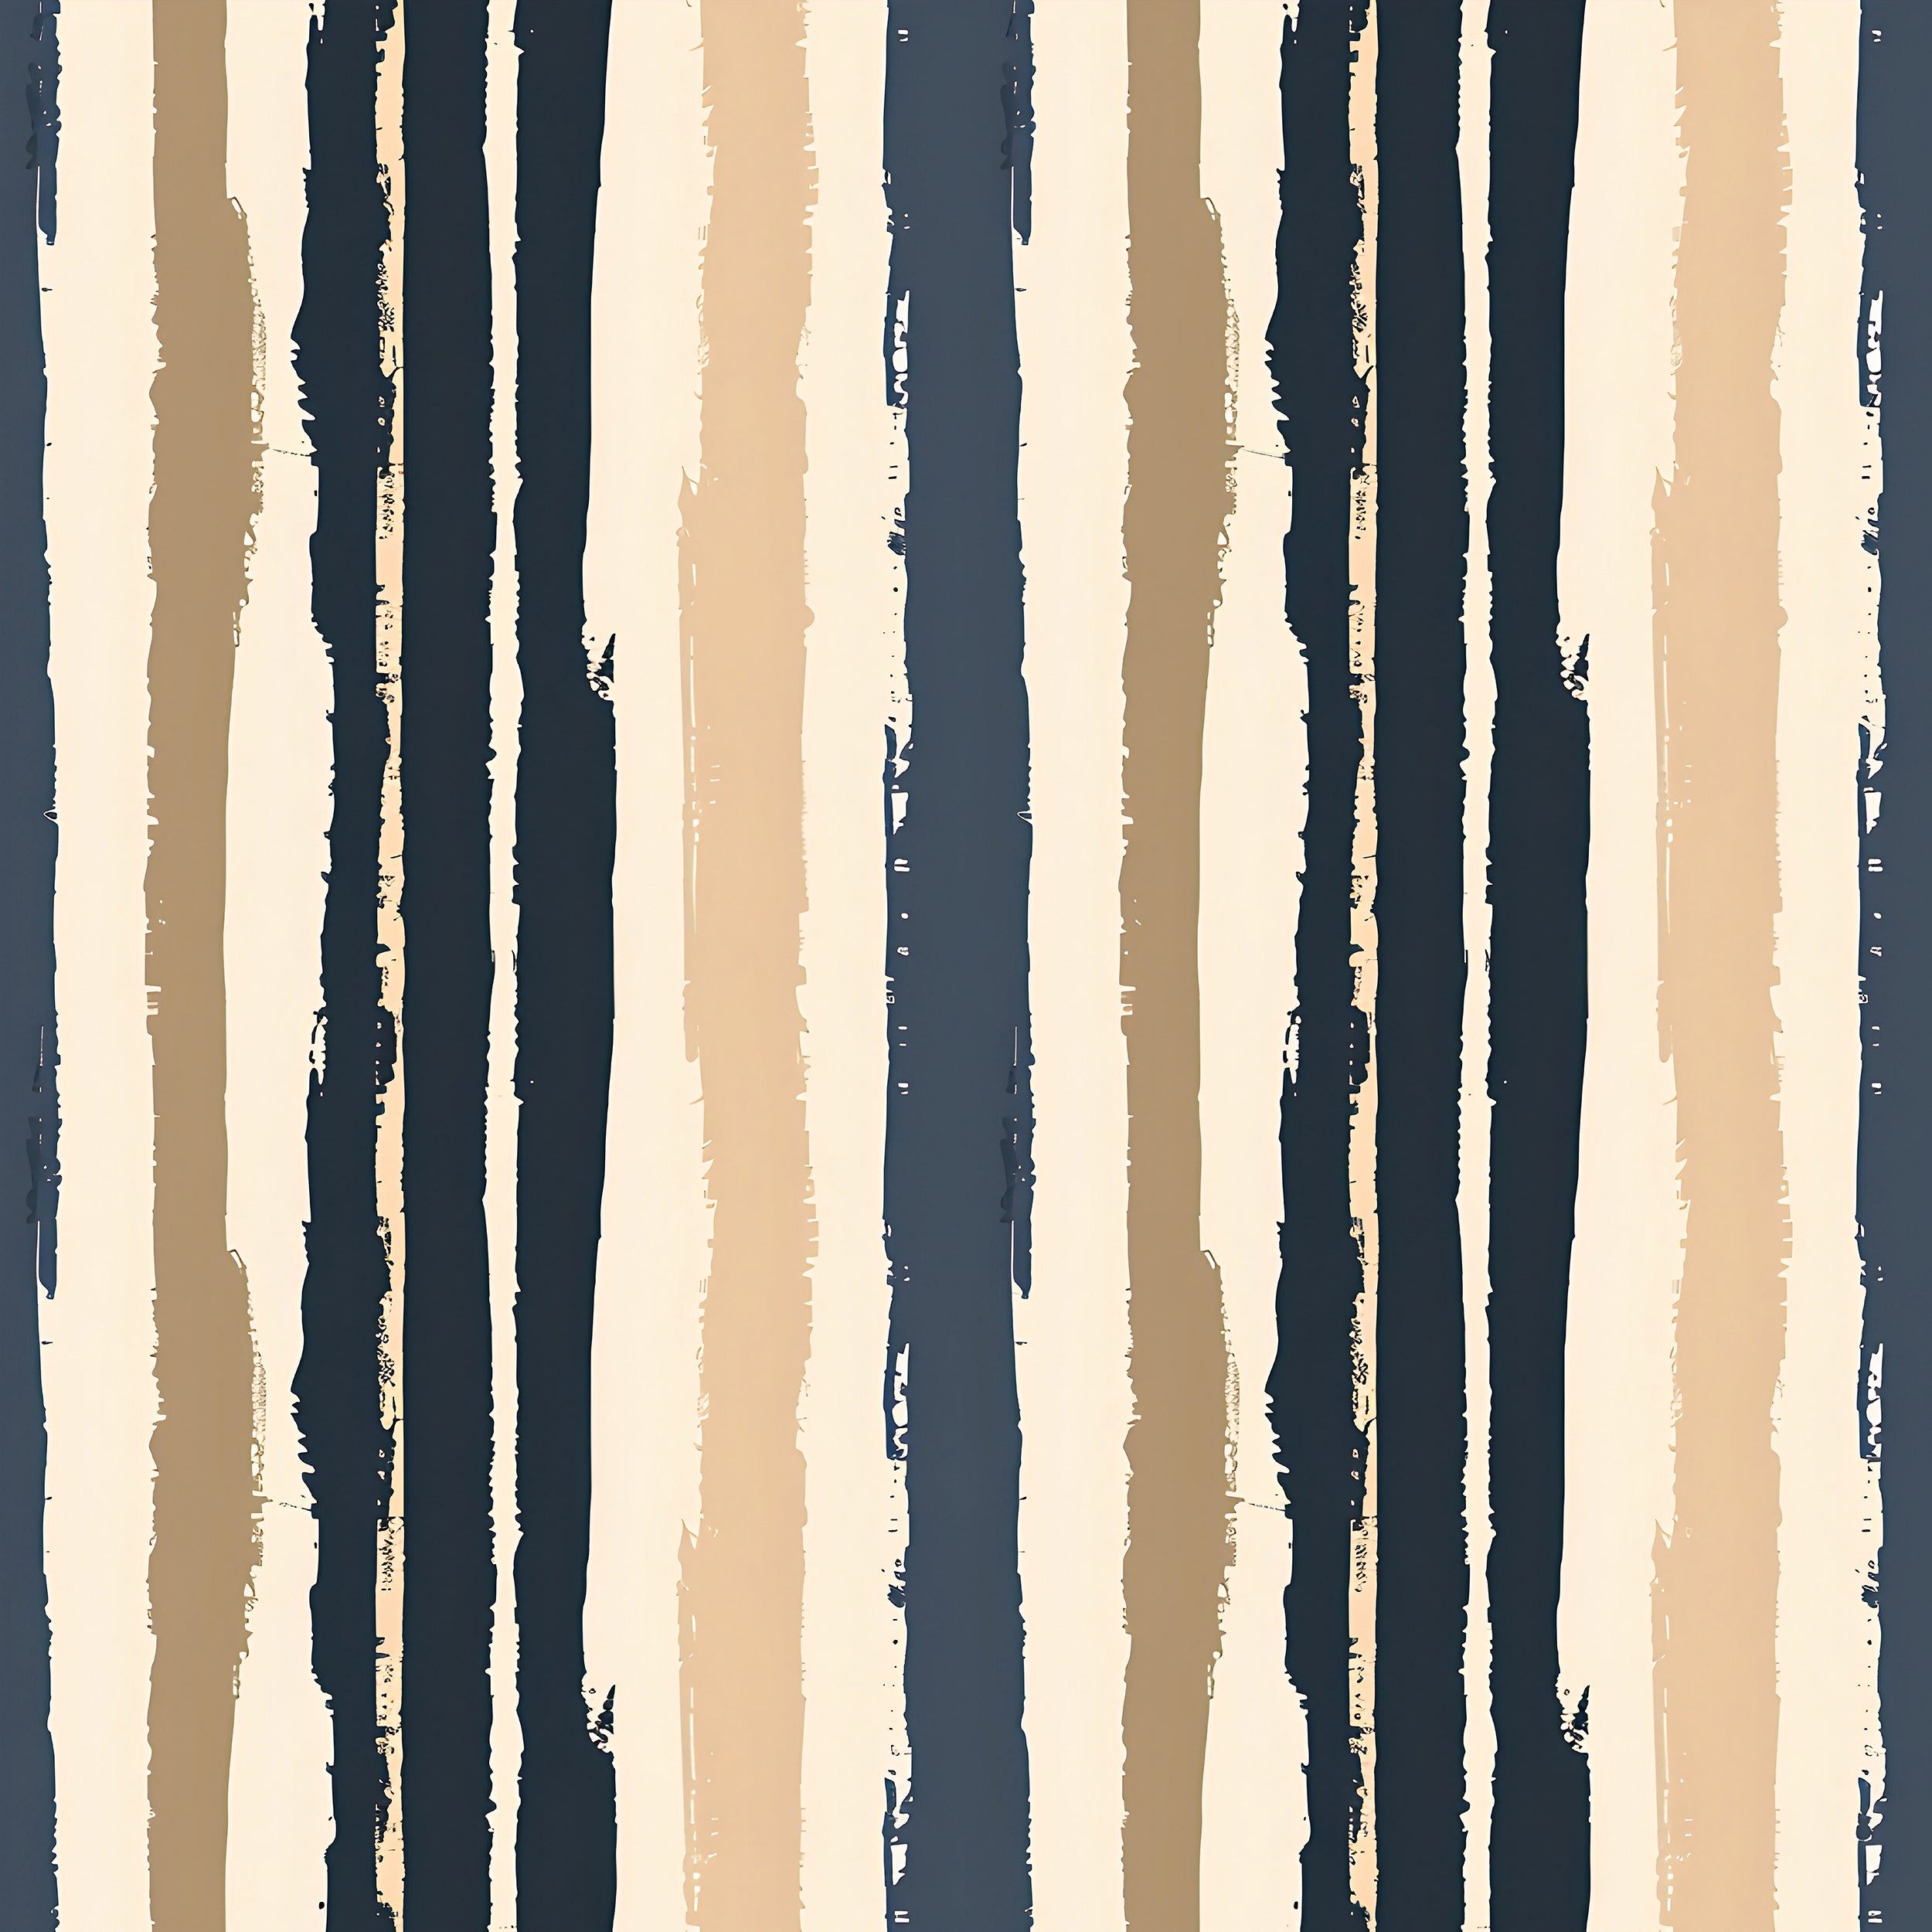 Peel and stick beige and blue wallpaper Removable vertical striped wallpaper